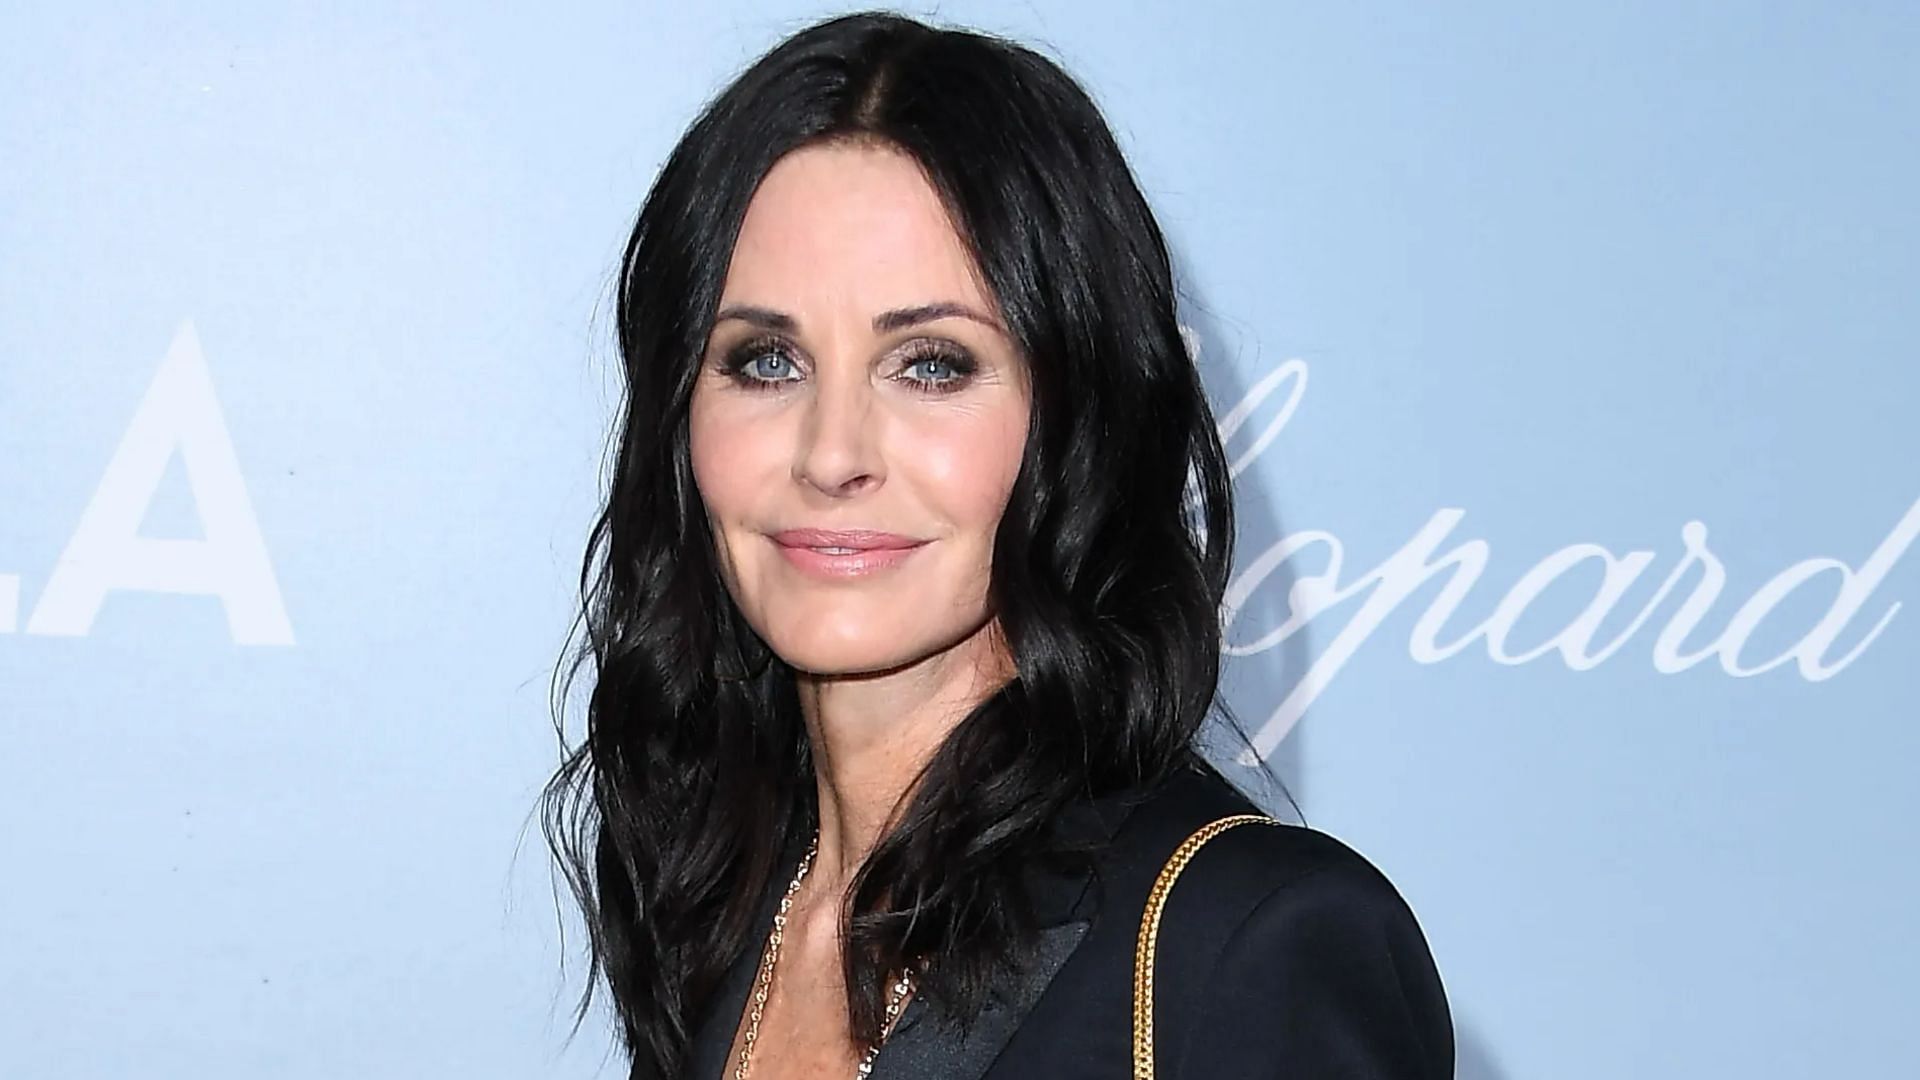 Courteney Cox regrets using face fillers. (Photo via Getty Images)